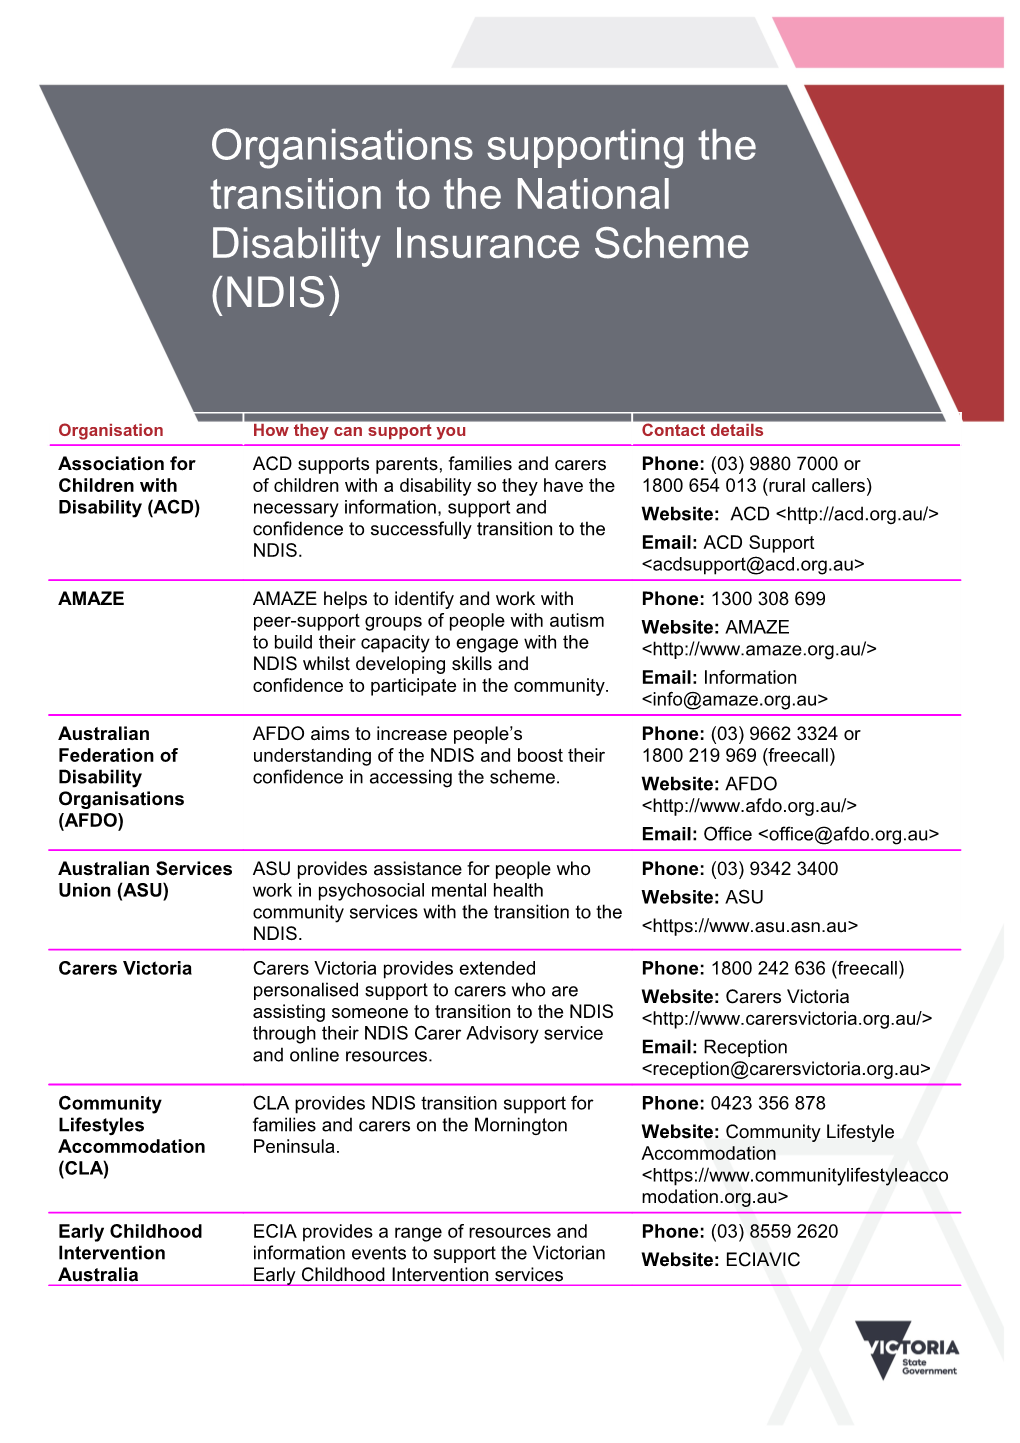 Organisations That Can Support Your Transition to the National Disability Insurance Scheme